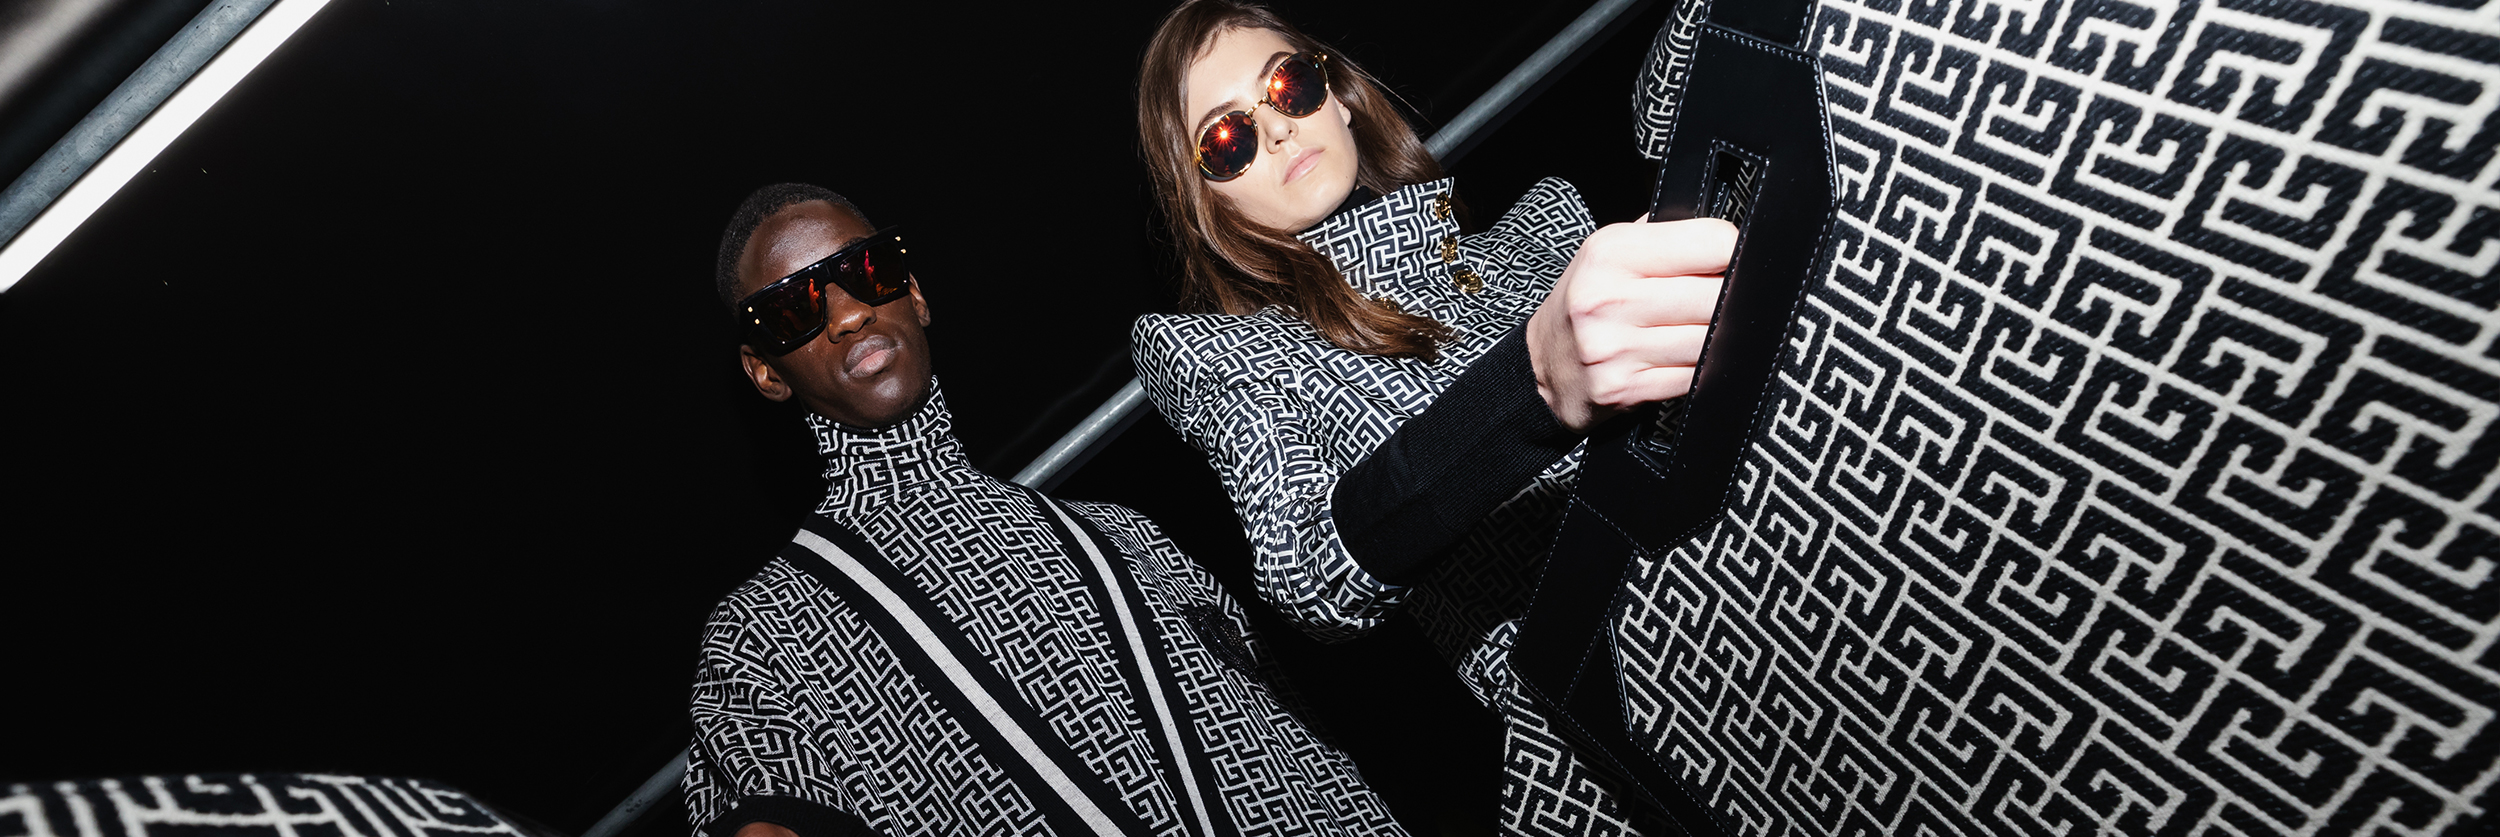 Introducing Fendi Reloaded, the Capsule Collection That Takes the